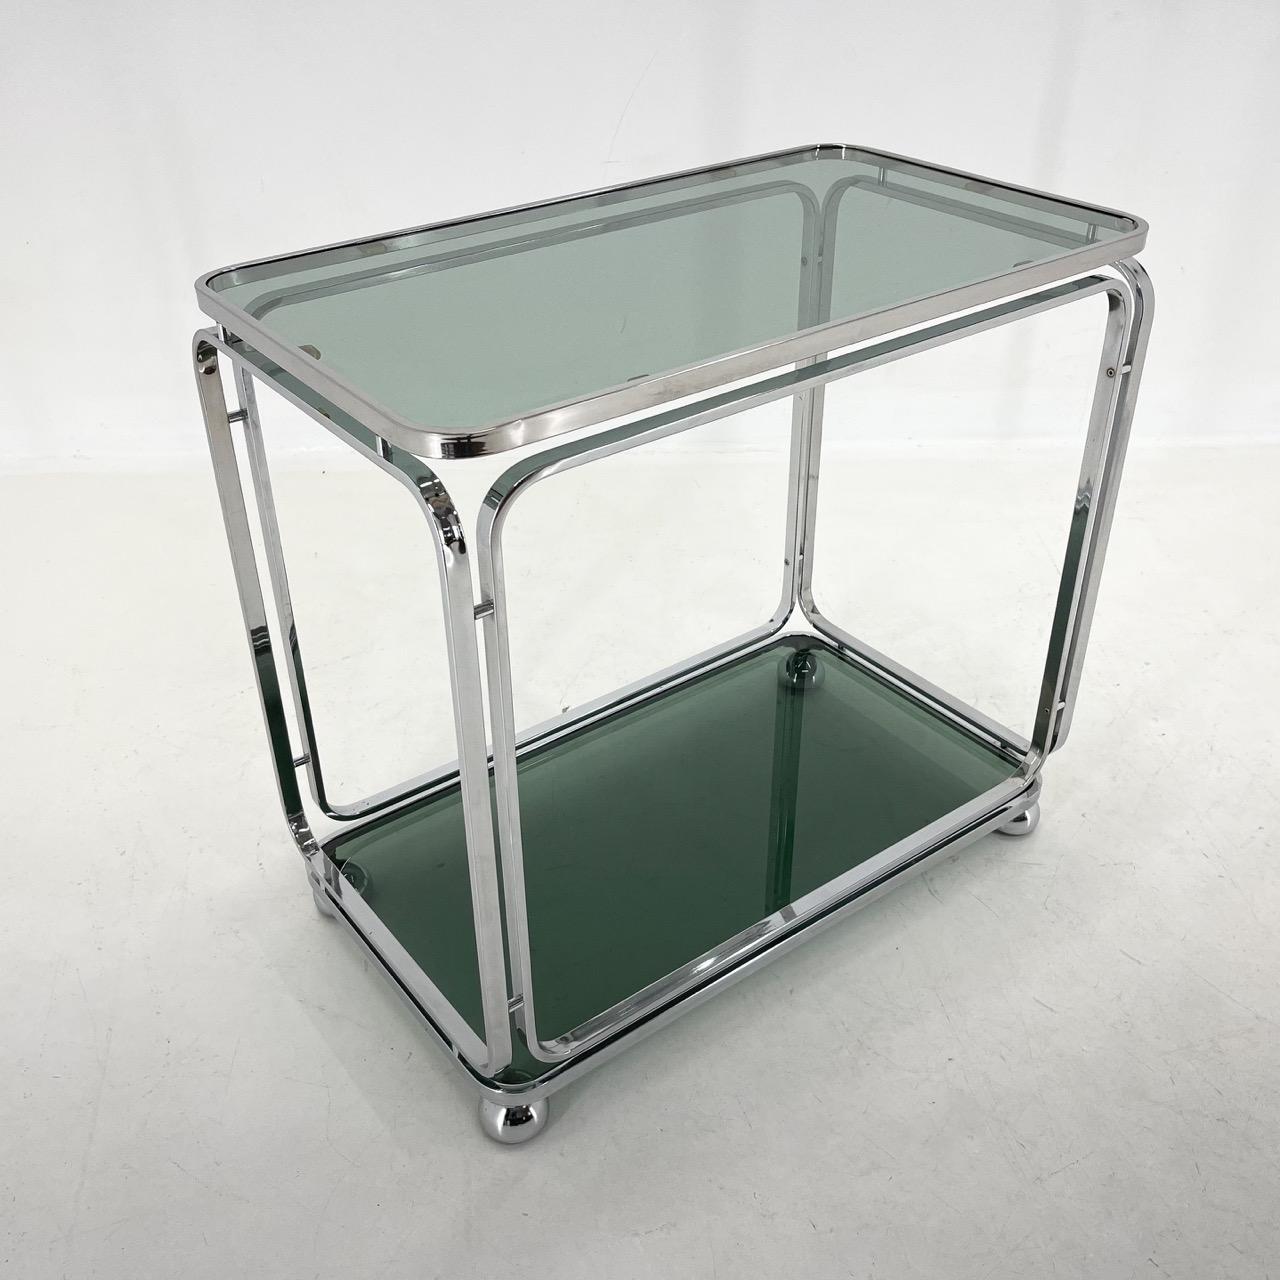 Stunning chromed serving cart with two smokey glass from Italy. In very nice vintage condition.